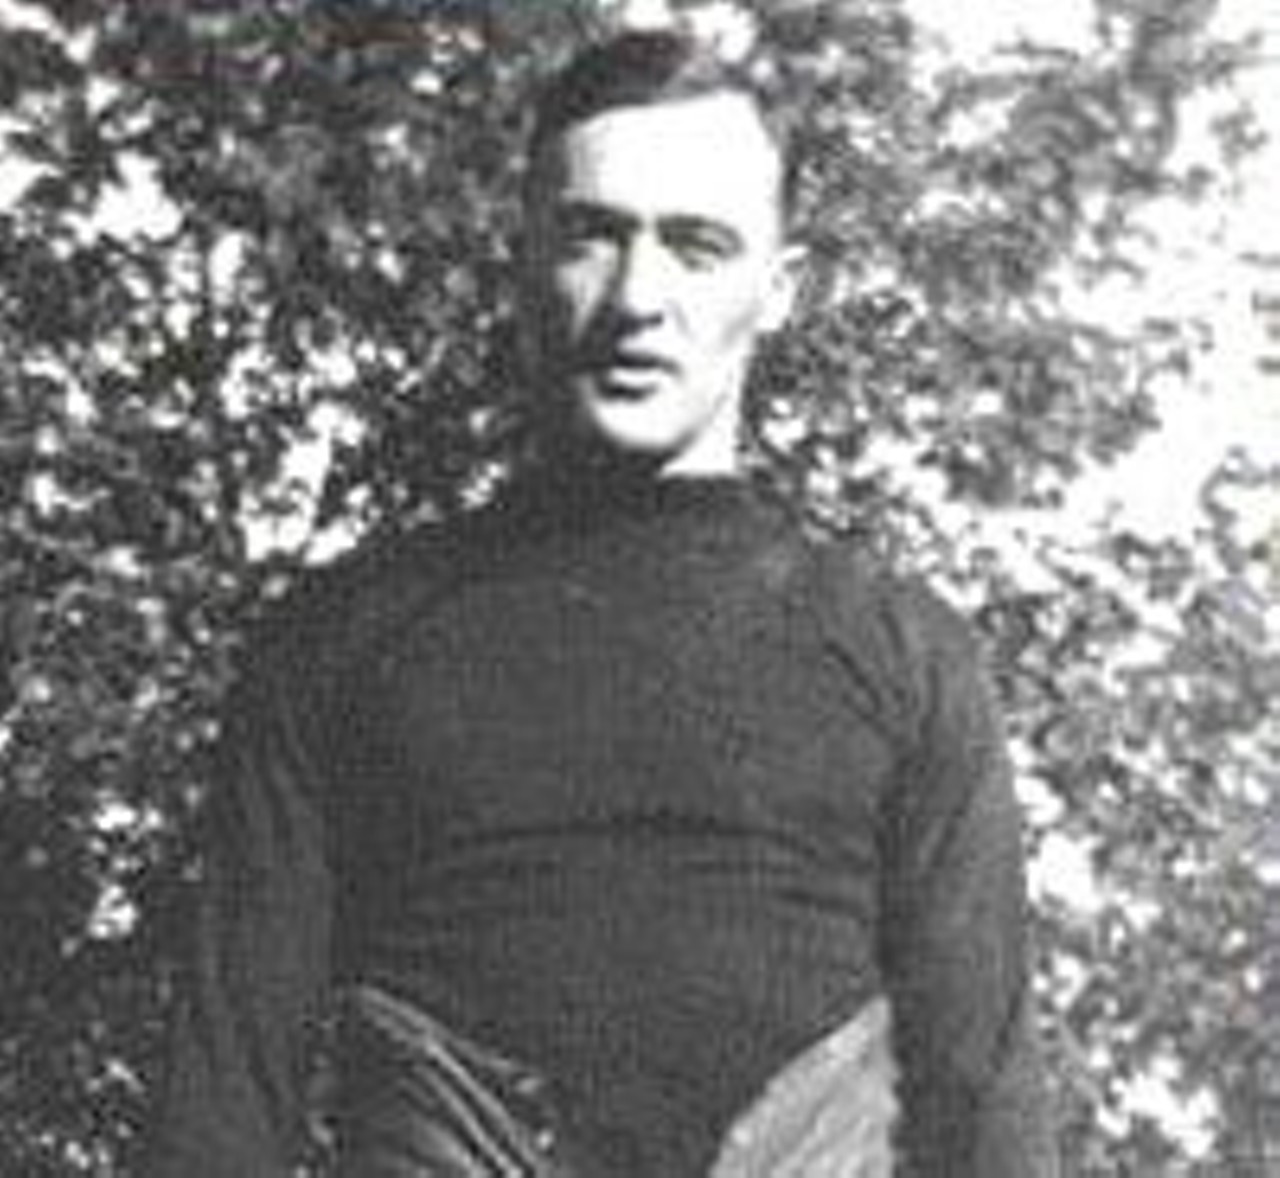 George Gipp
Nicknamed &#147;The Gipper,&#148; George Gipp was a talented football player for Notre Dame University. He still holds a number of records at Notre Dame, including for average yards per rush for a season. In 1920, Gipp died at just 25 years old following a pneumonia infection. He is buried in Lake View Cemetery in Calumet in the Upper Peninsula.&nbsp;
Photo via Jwalte04 / Wikimedia Commons